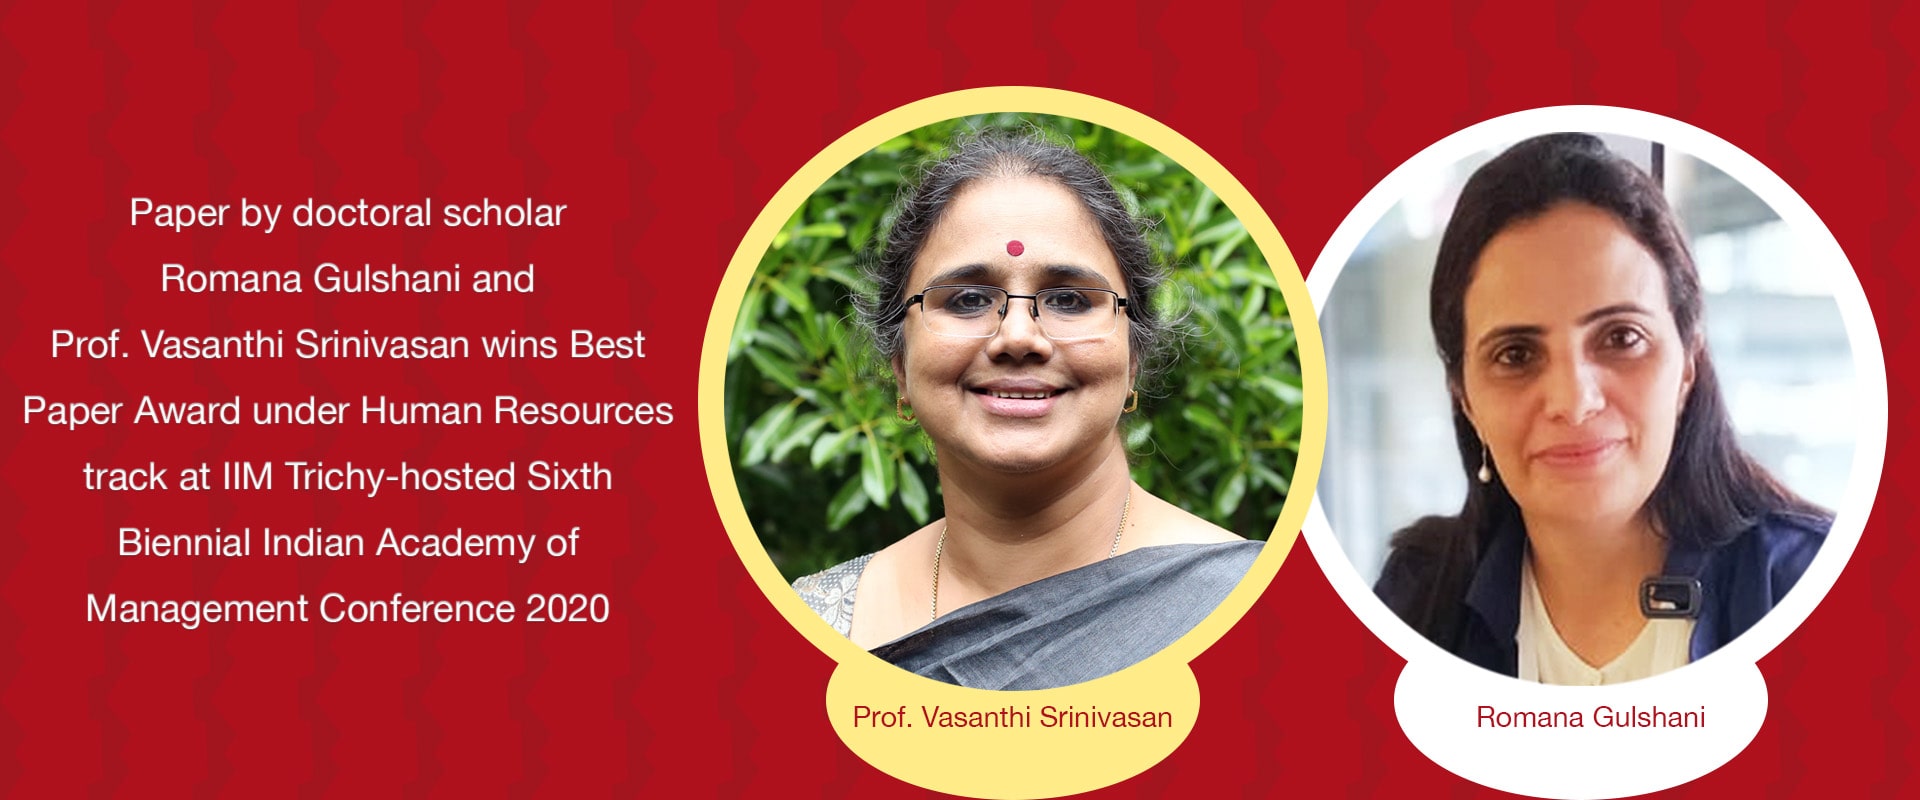 Paper by doctoral scholar Romana Gulshani and Prof. Vasanthi Srinivasan wins Best Paper Award under Human Resources track at IIM Trichy-hosted Sixth Biennial Indian Academy of Management Conference 2020